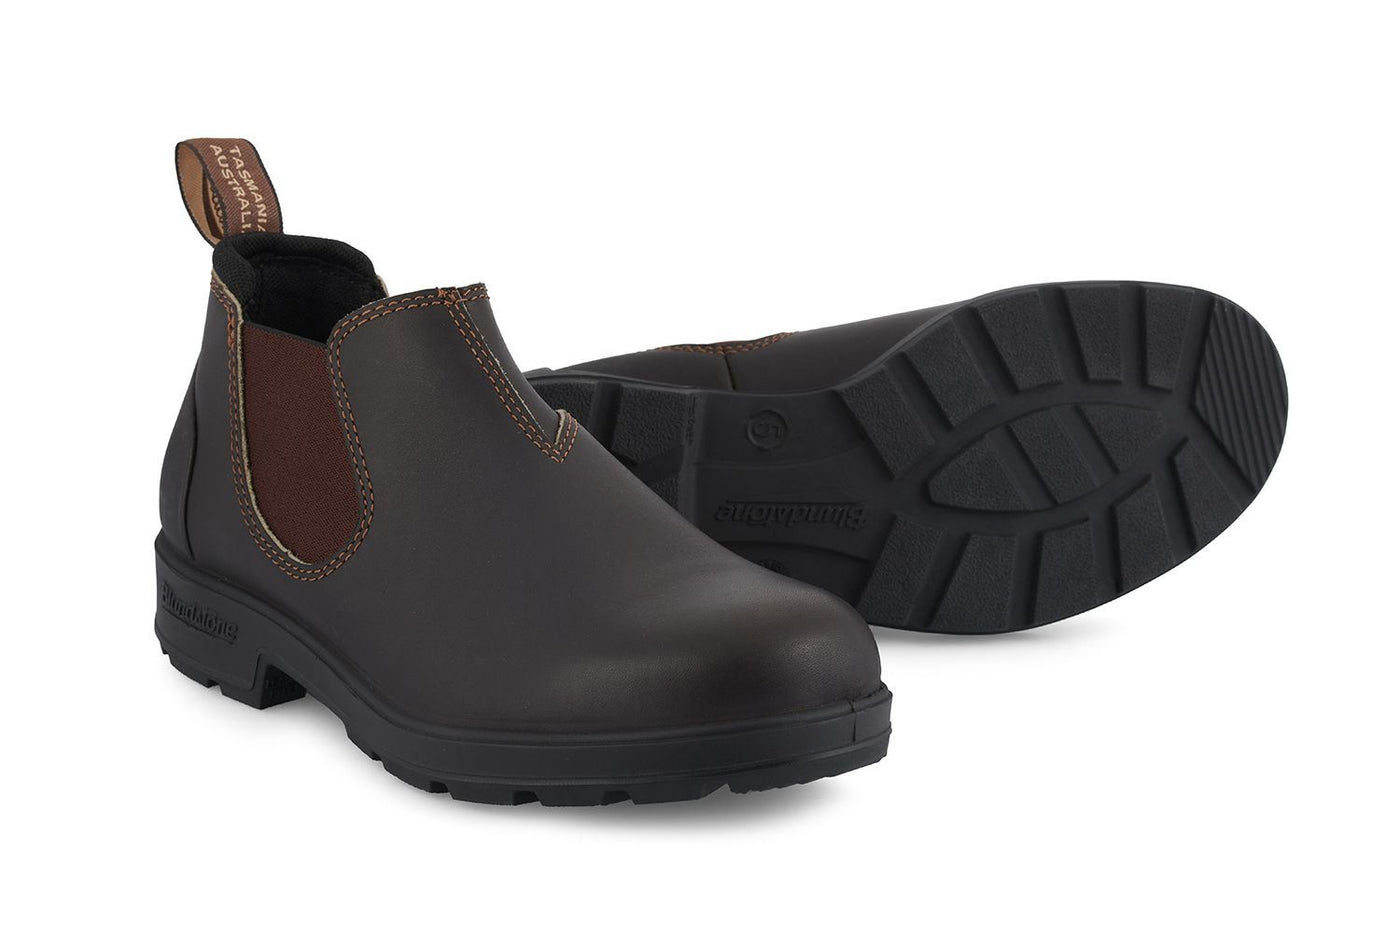 Blundstone #2038 Stout Brown Chelsea Boot